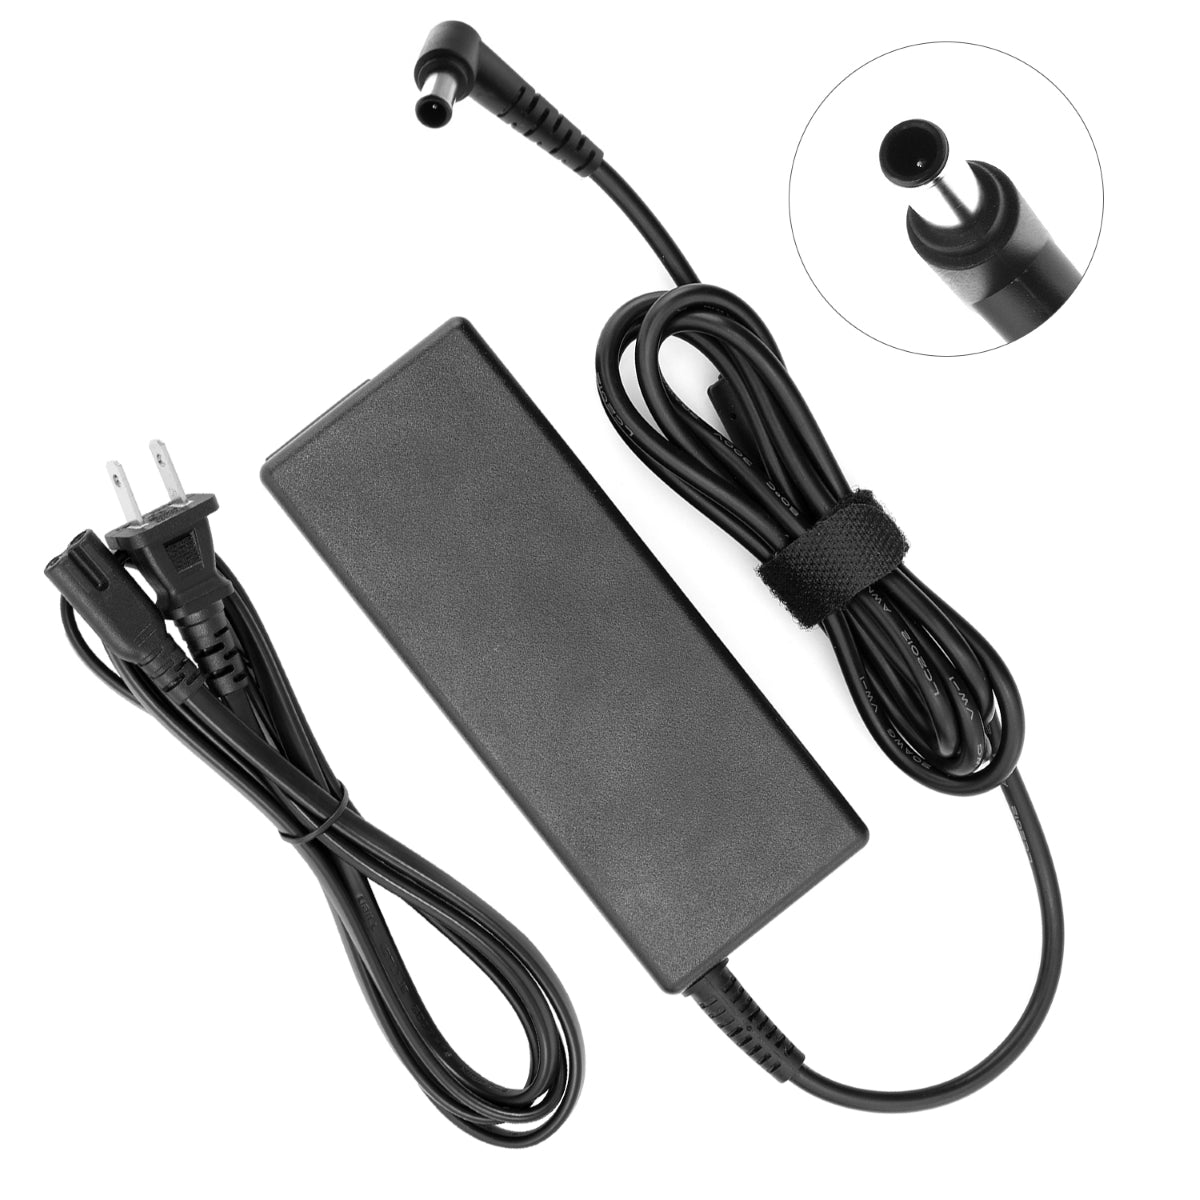 AC Adapter for LG 23EA53V Monitor